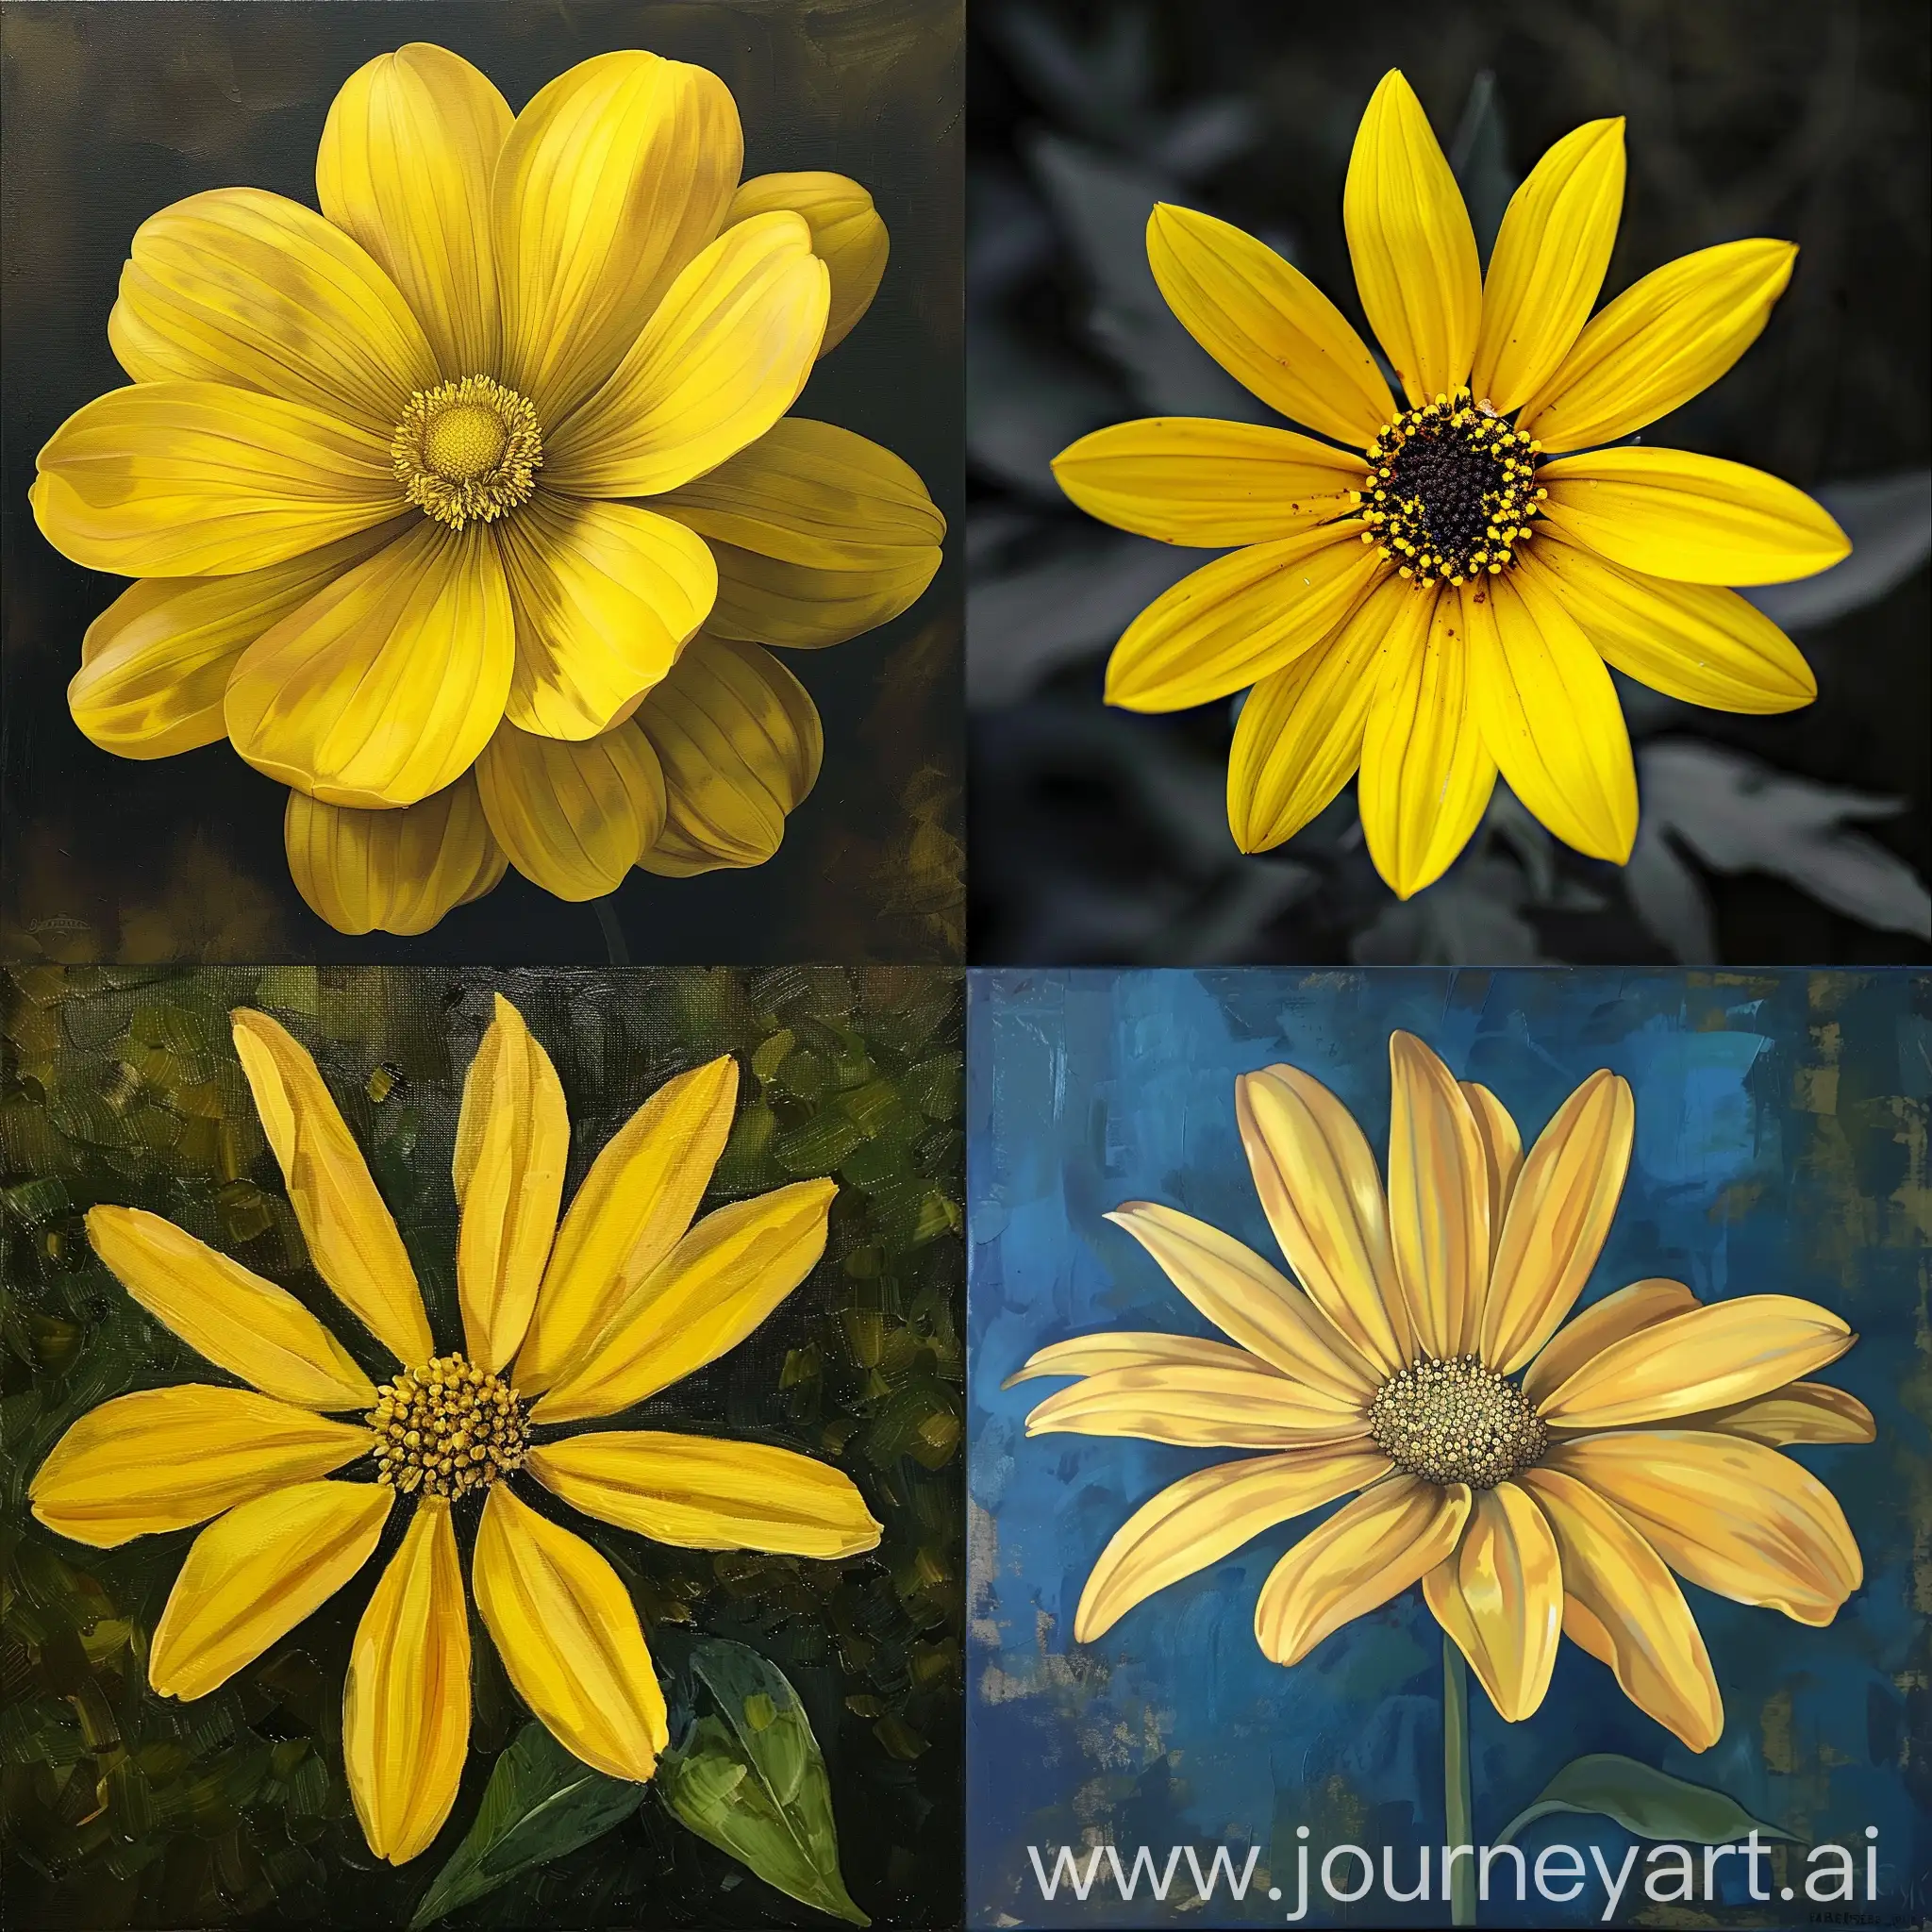 Vibrant-Yellow-Flower-in-Closeup-View